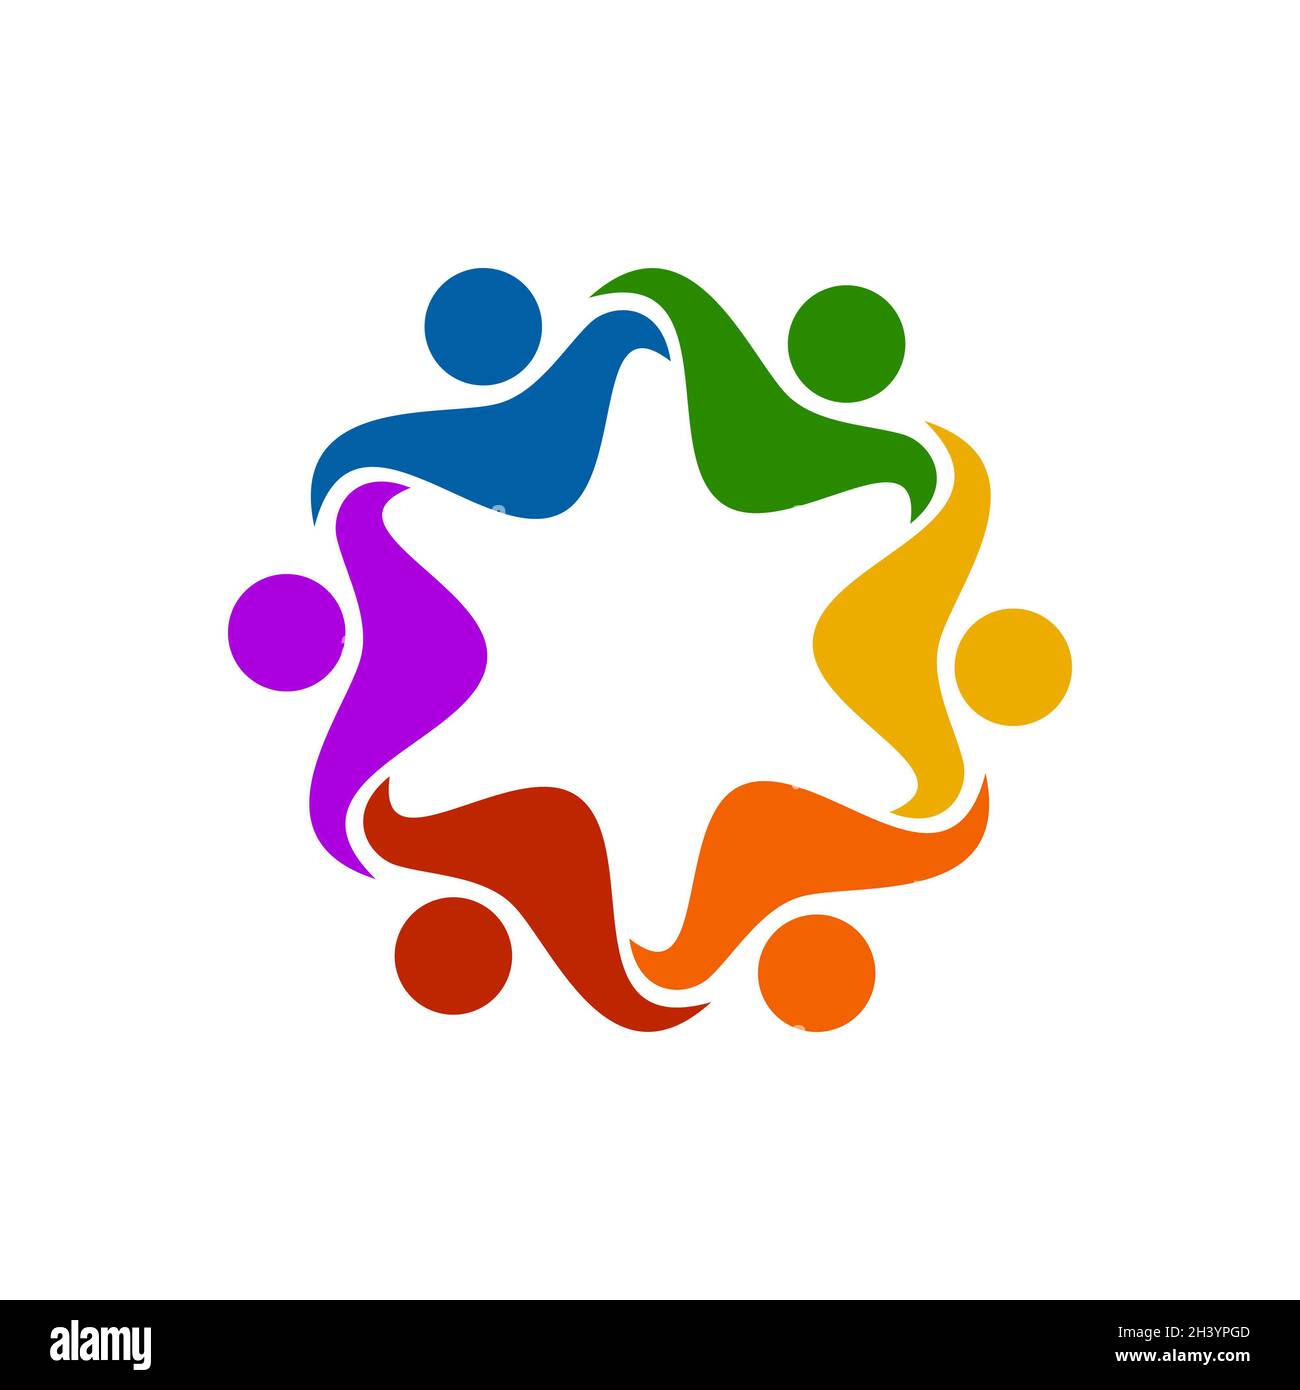 Abstract people logo design related to teamwork Stock Photo